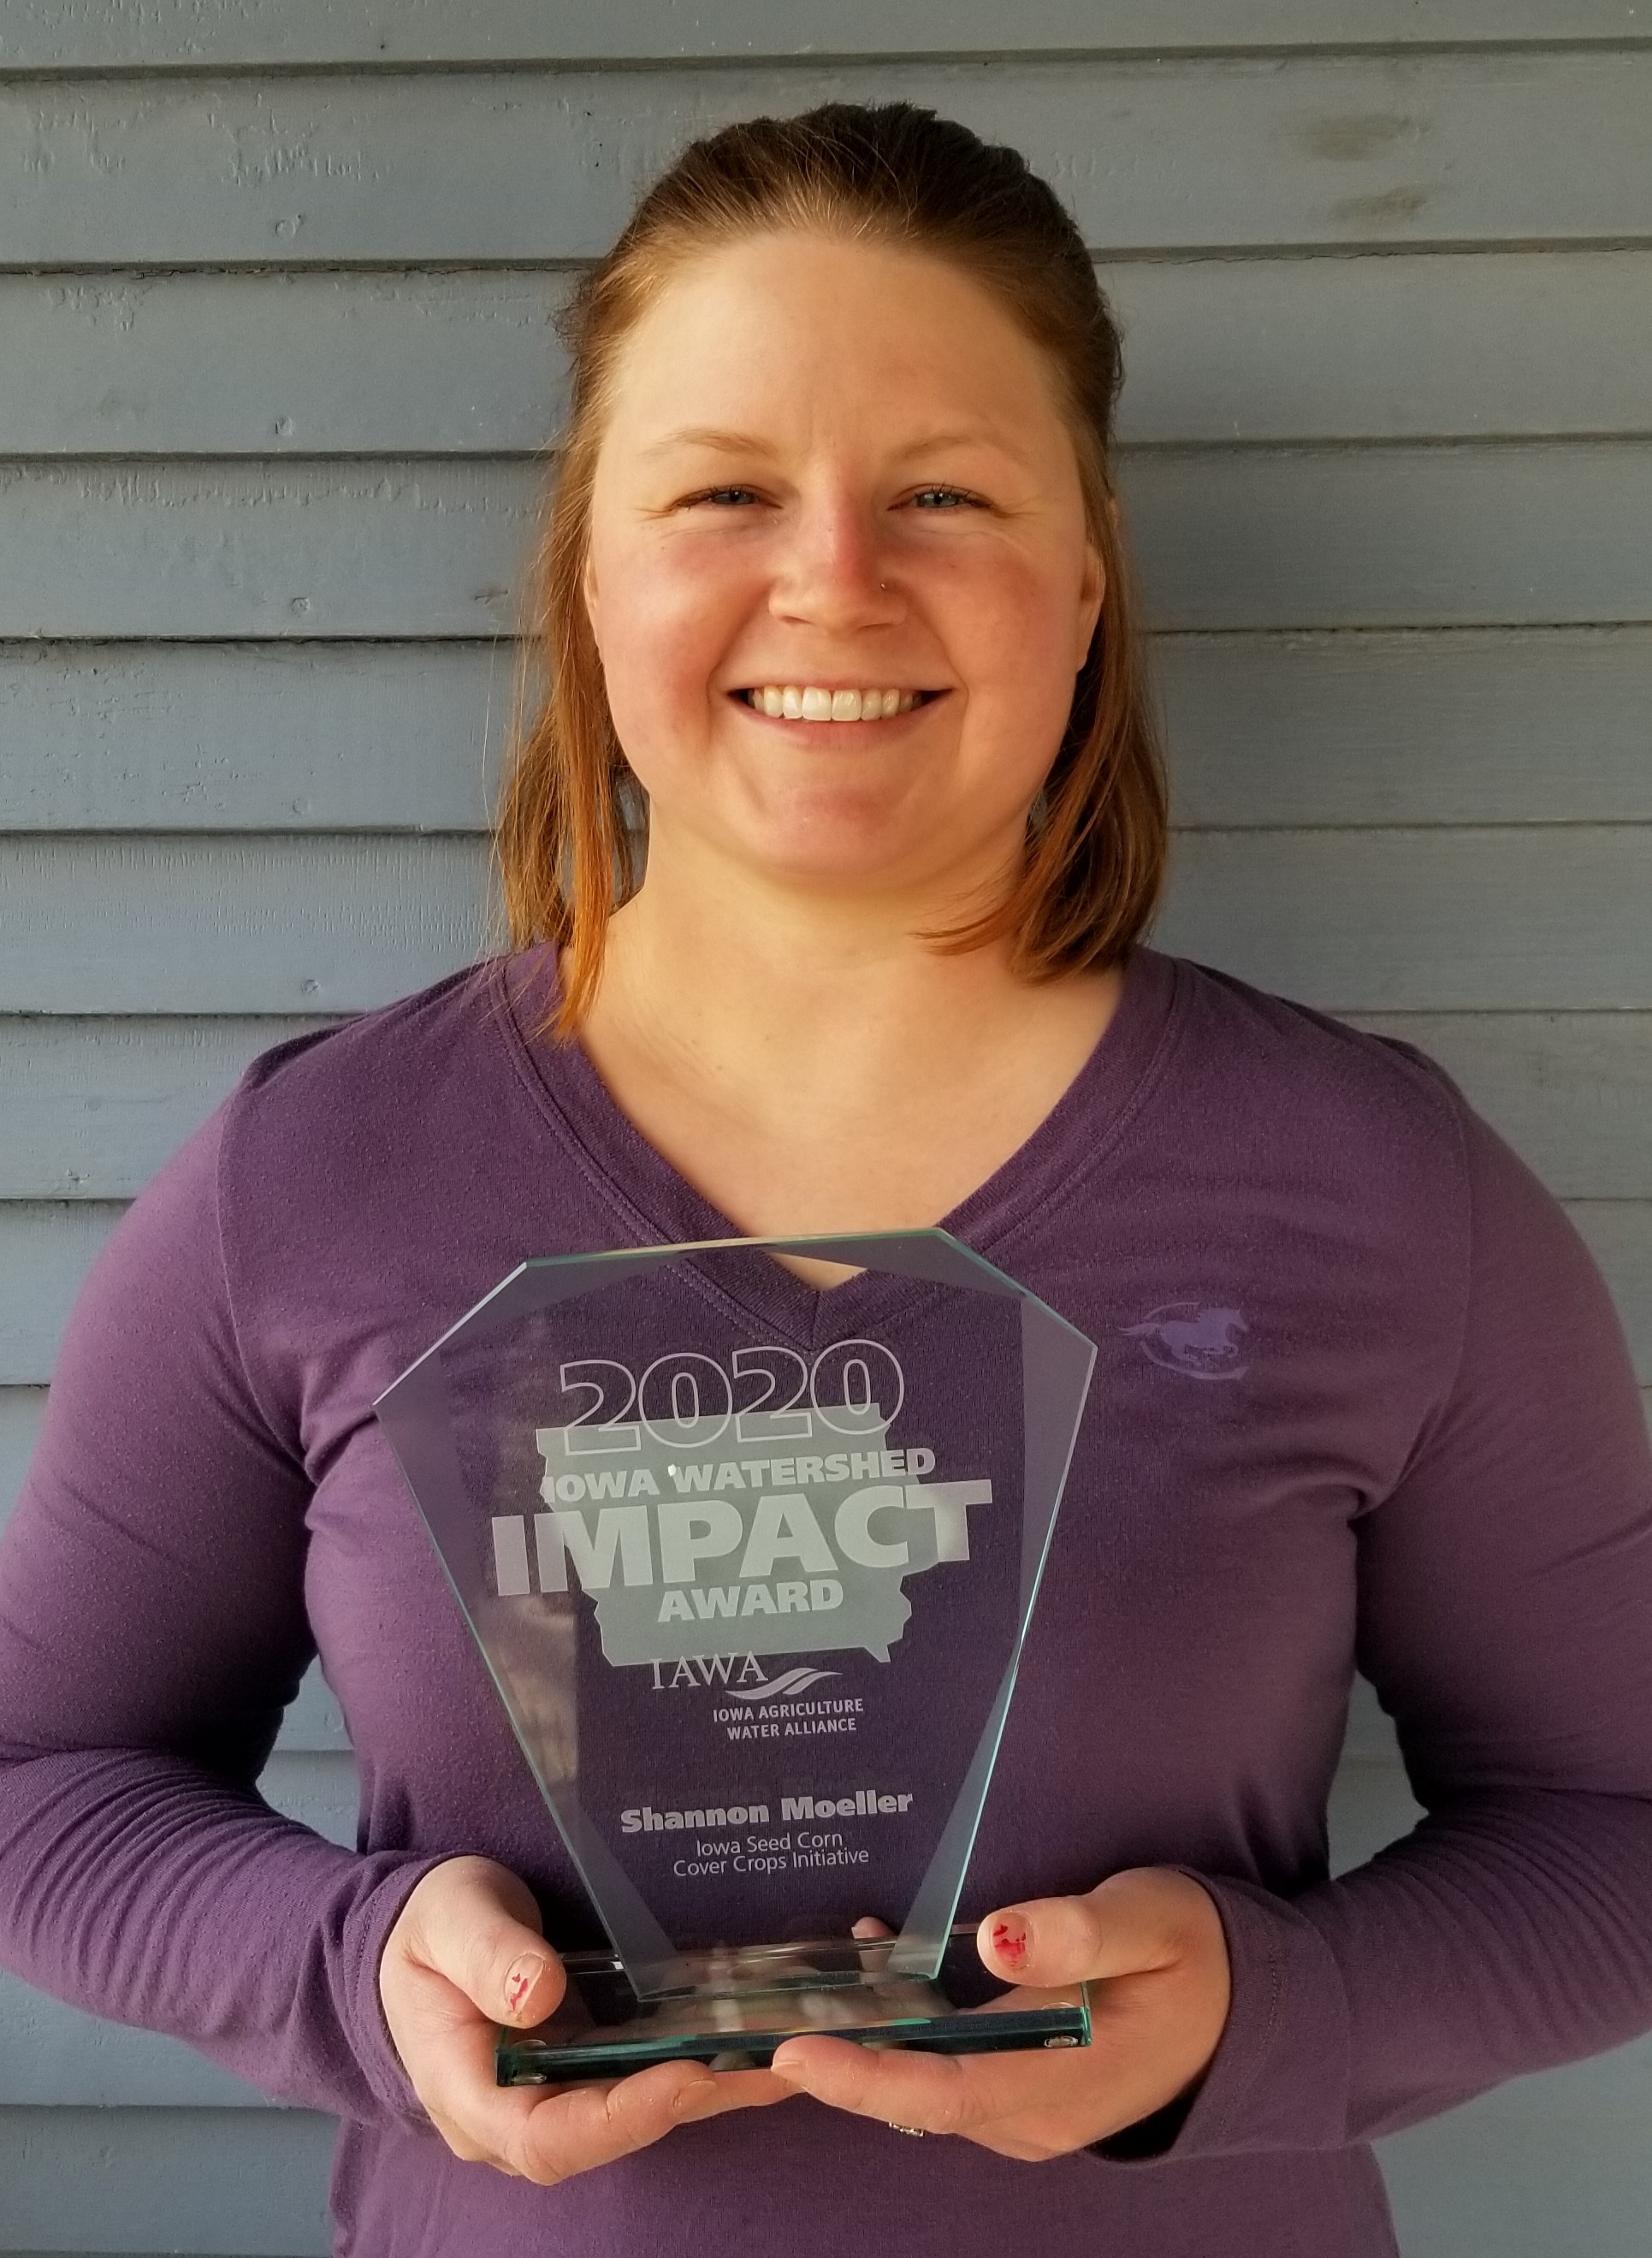 Shannon Moeller with plaque for Iowa Watershed Impact Award.